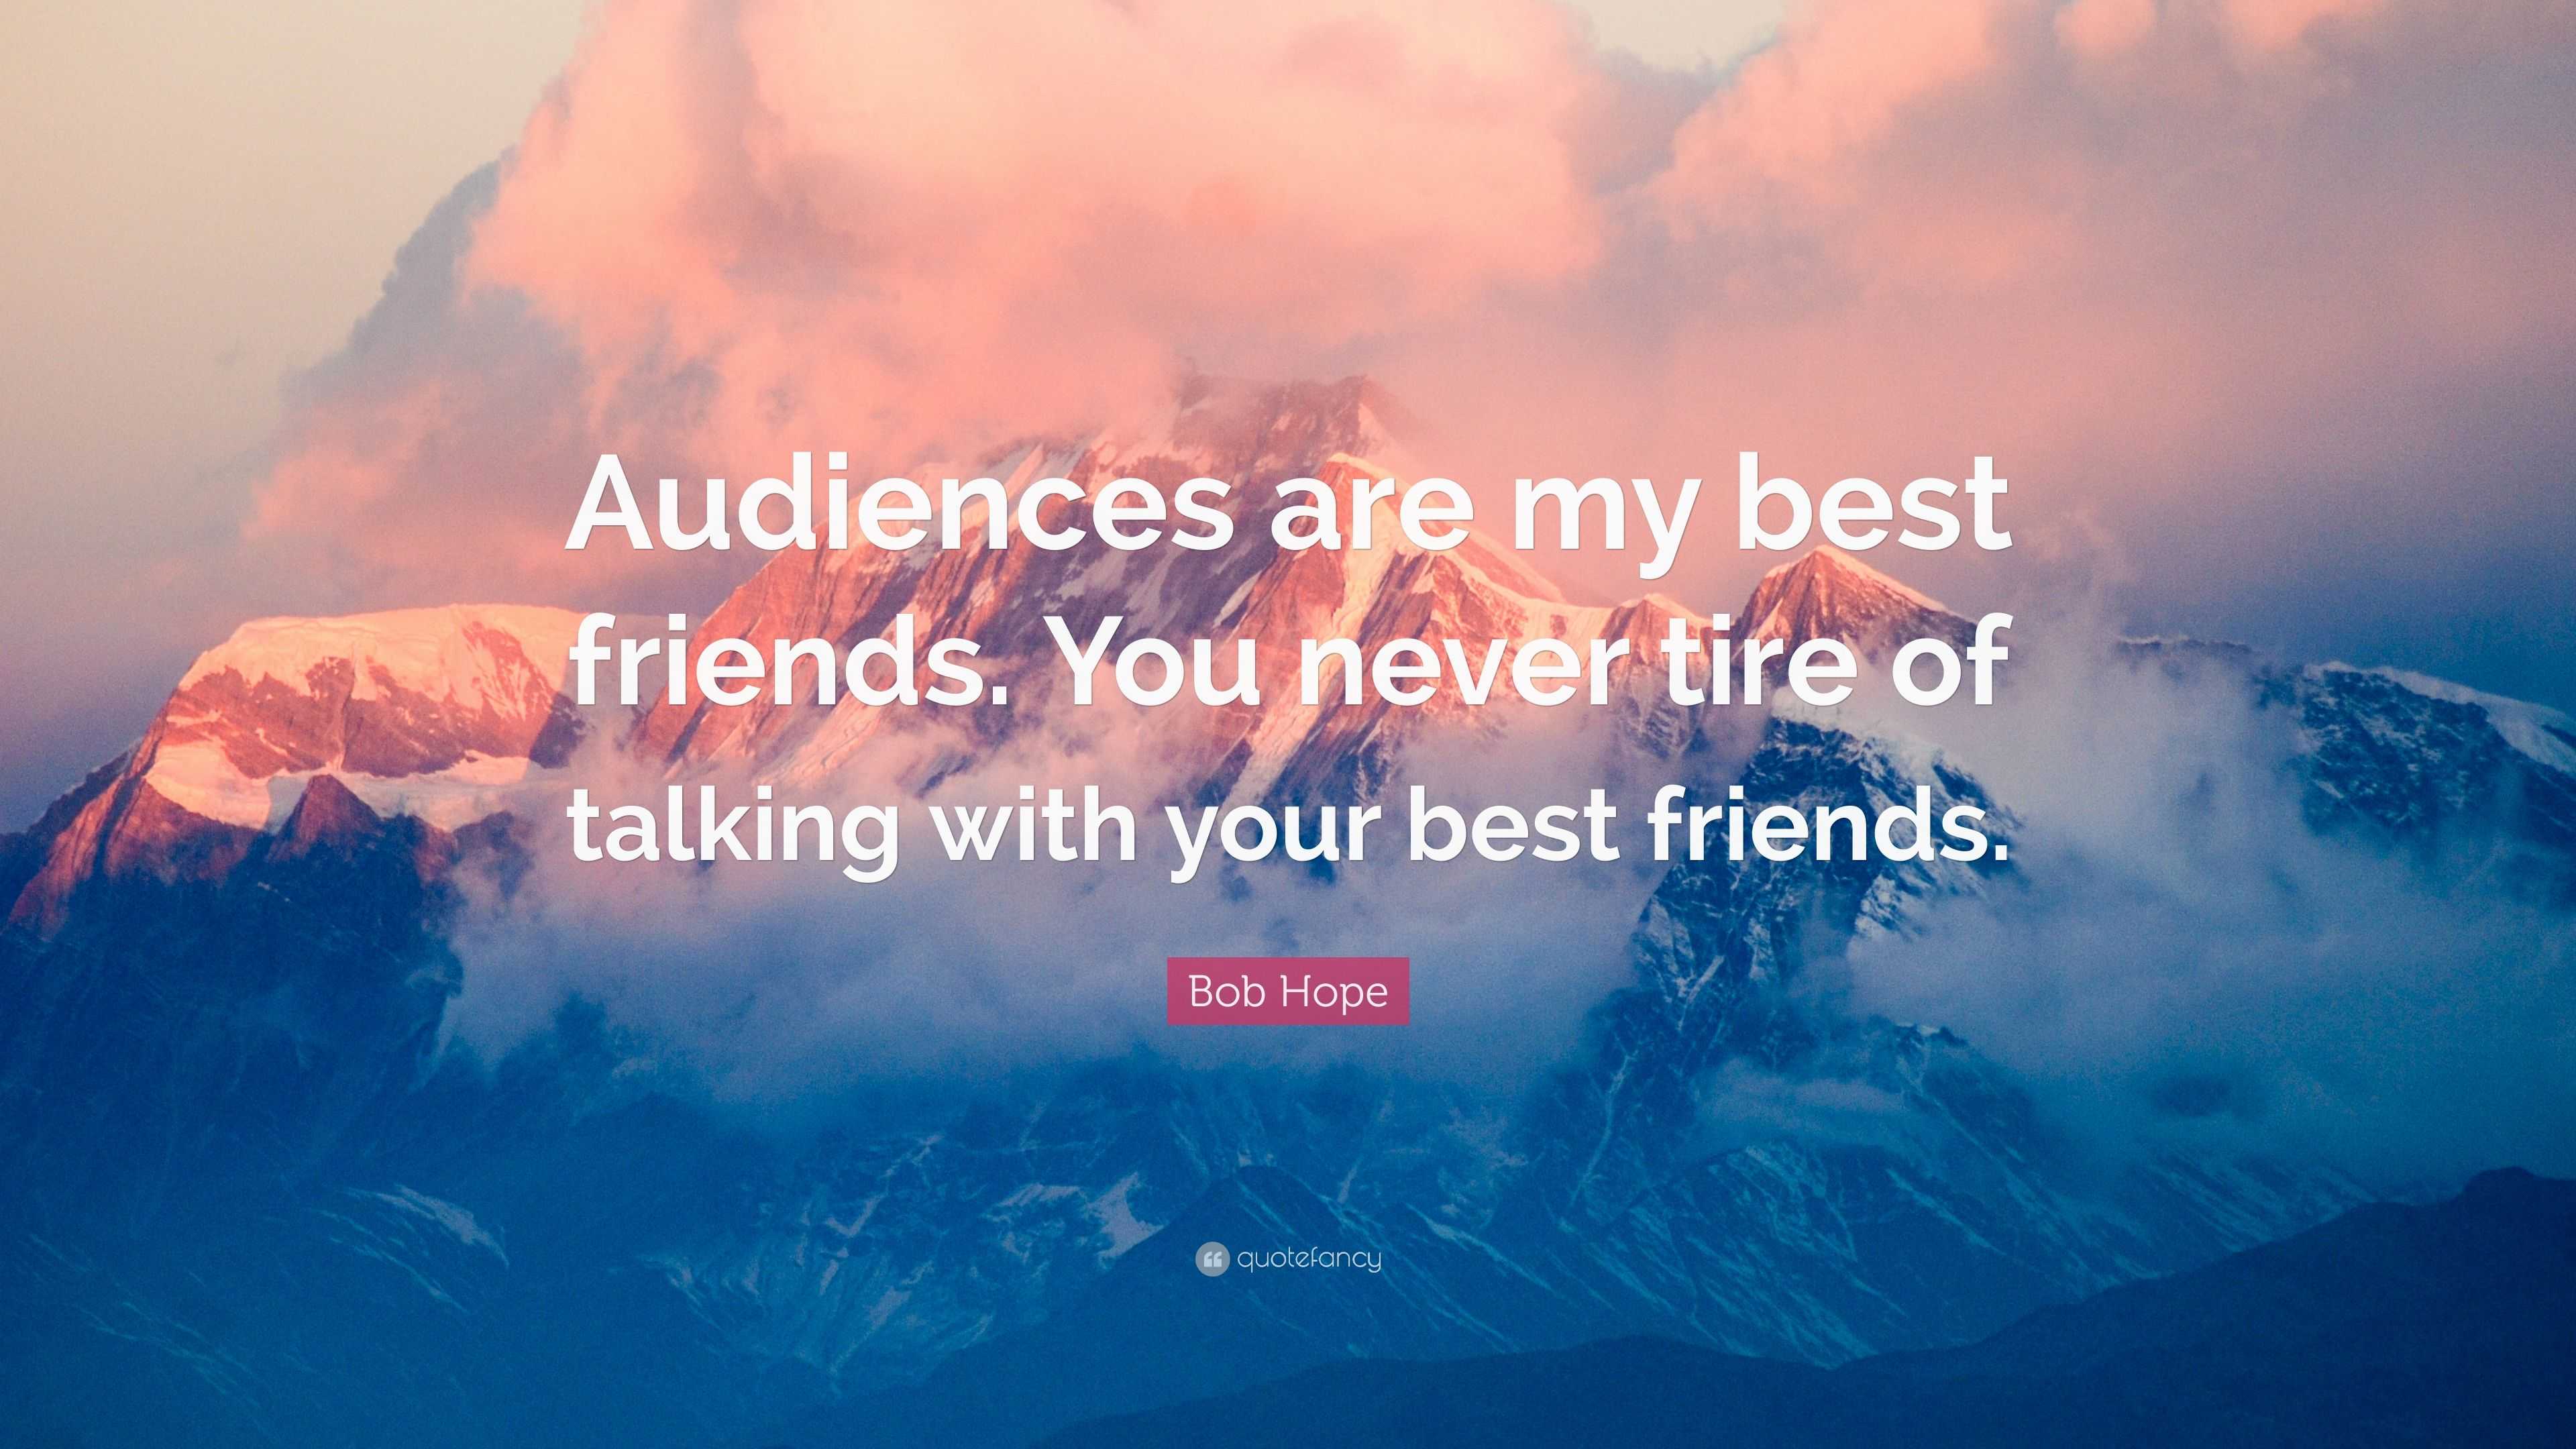 Bob Hope Quote: “Audiences are my best friends. You never tire of ...